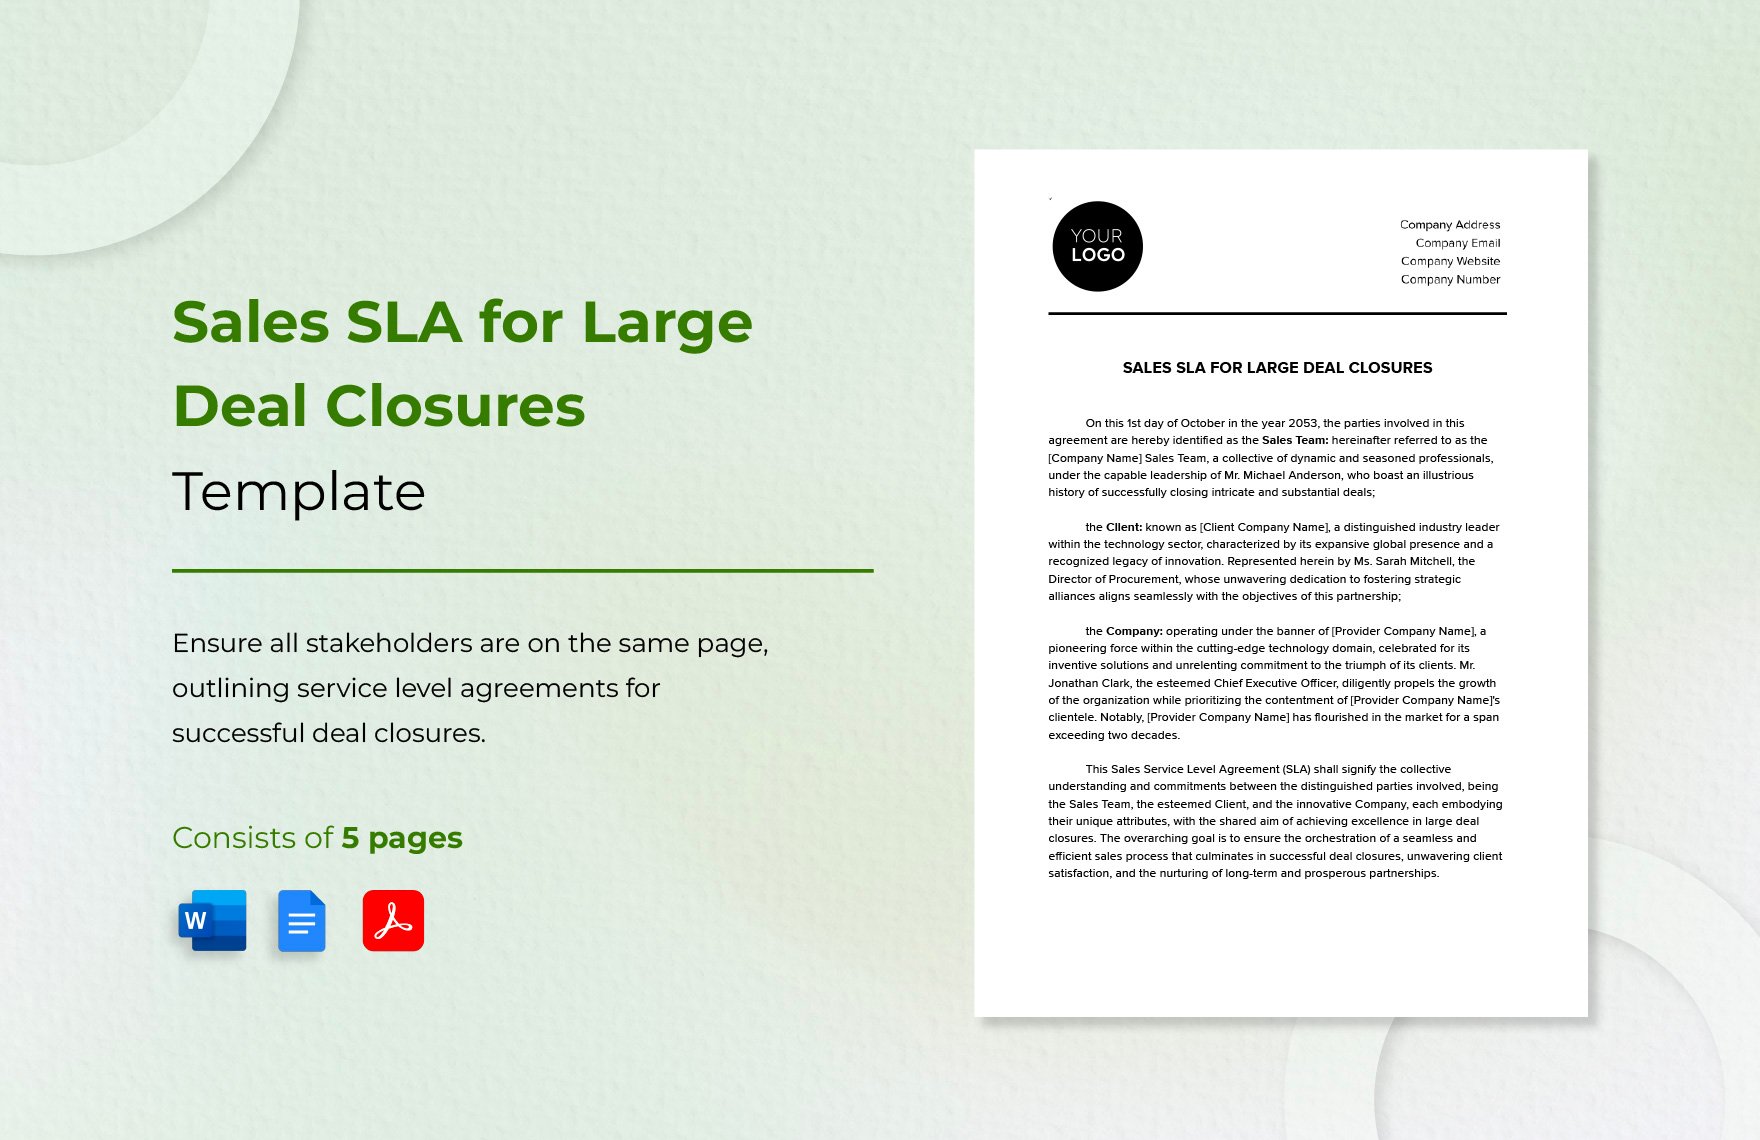 Sales SLA for Large Deal Closures Template